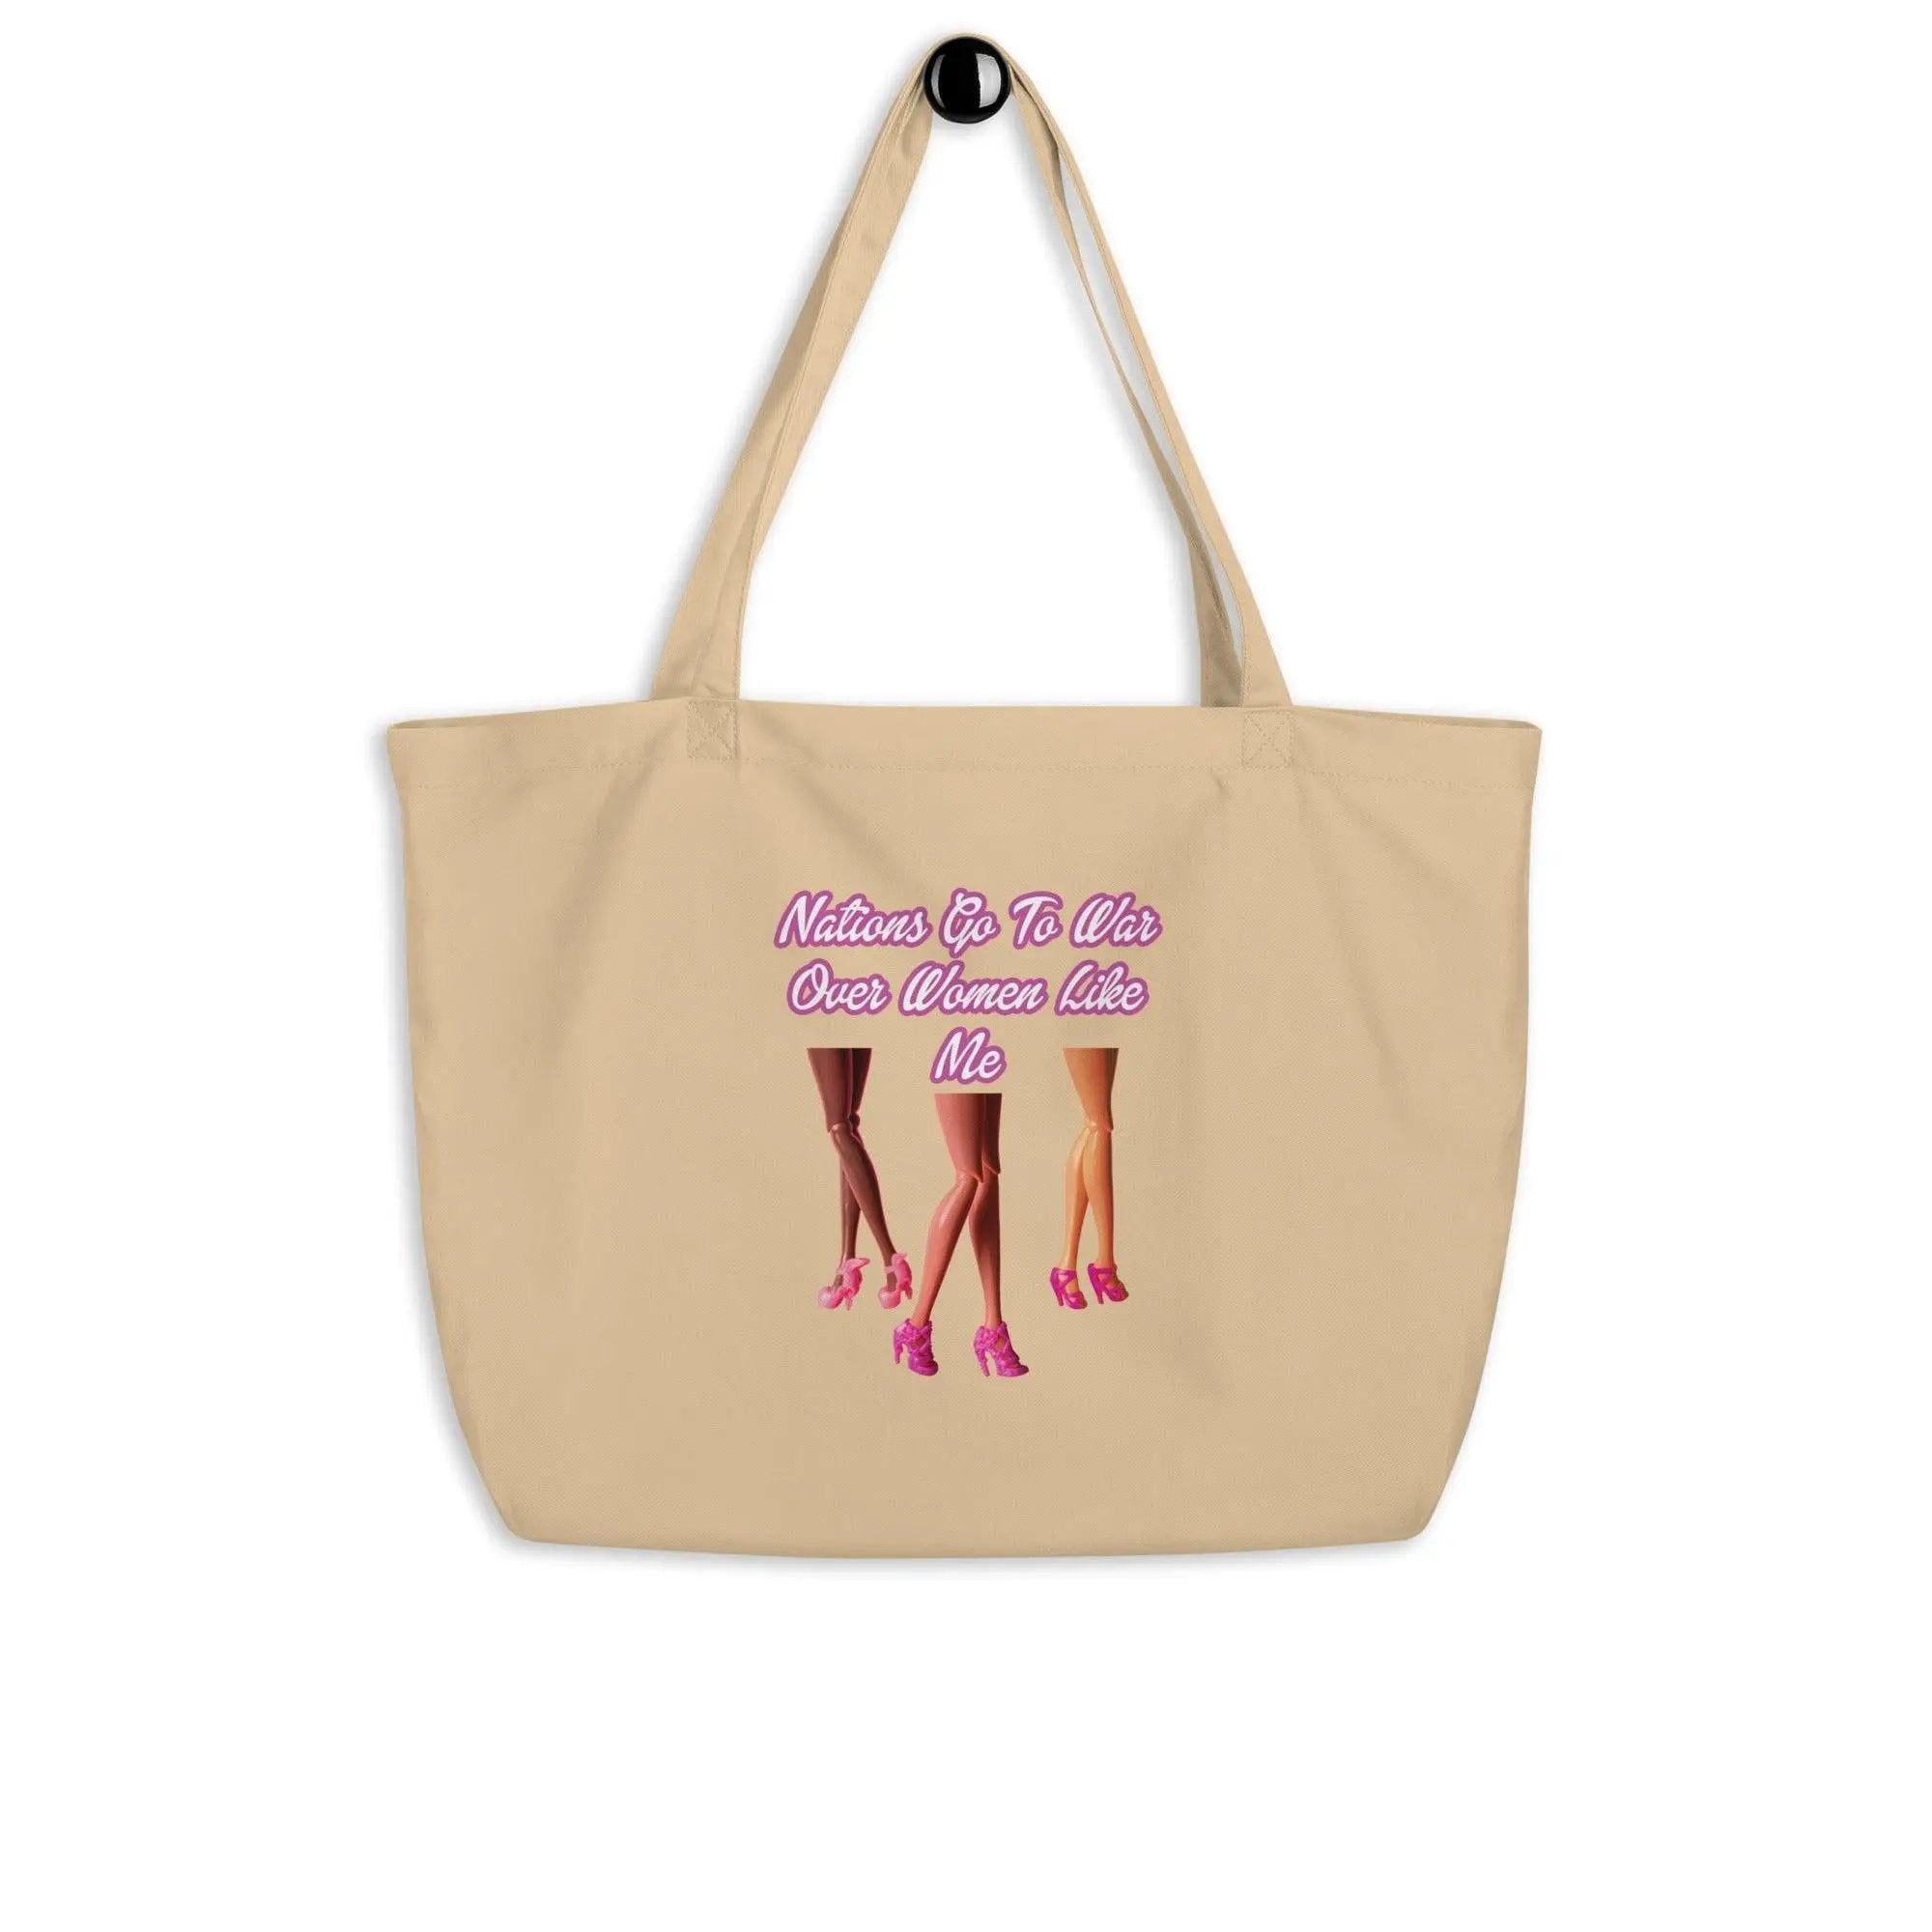 Nations Go To War Over Women Like Me Large organic tote bag